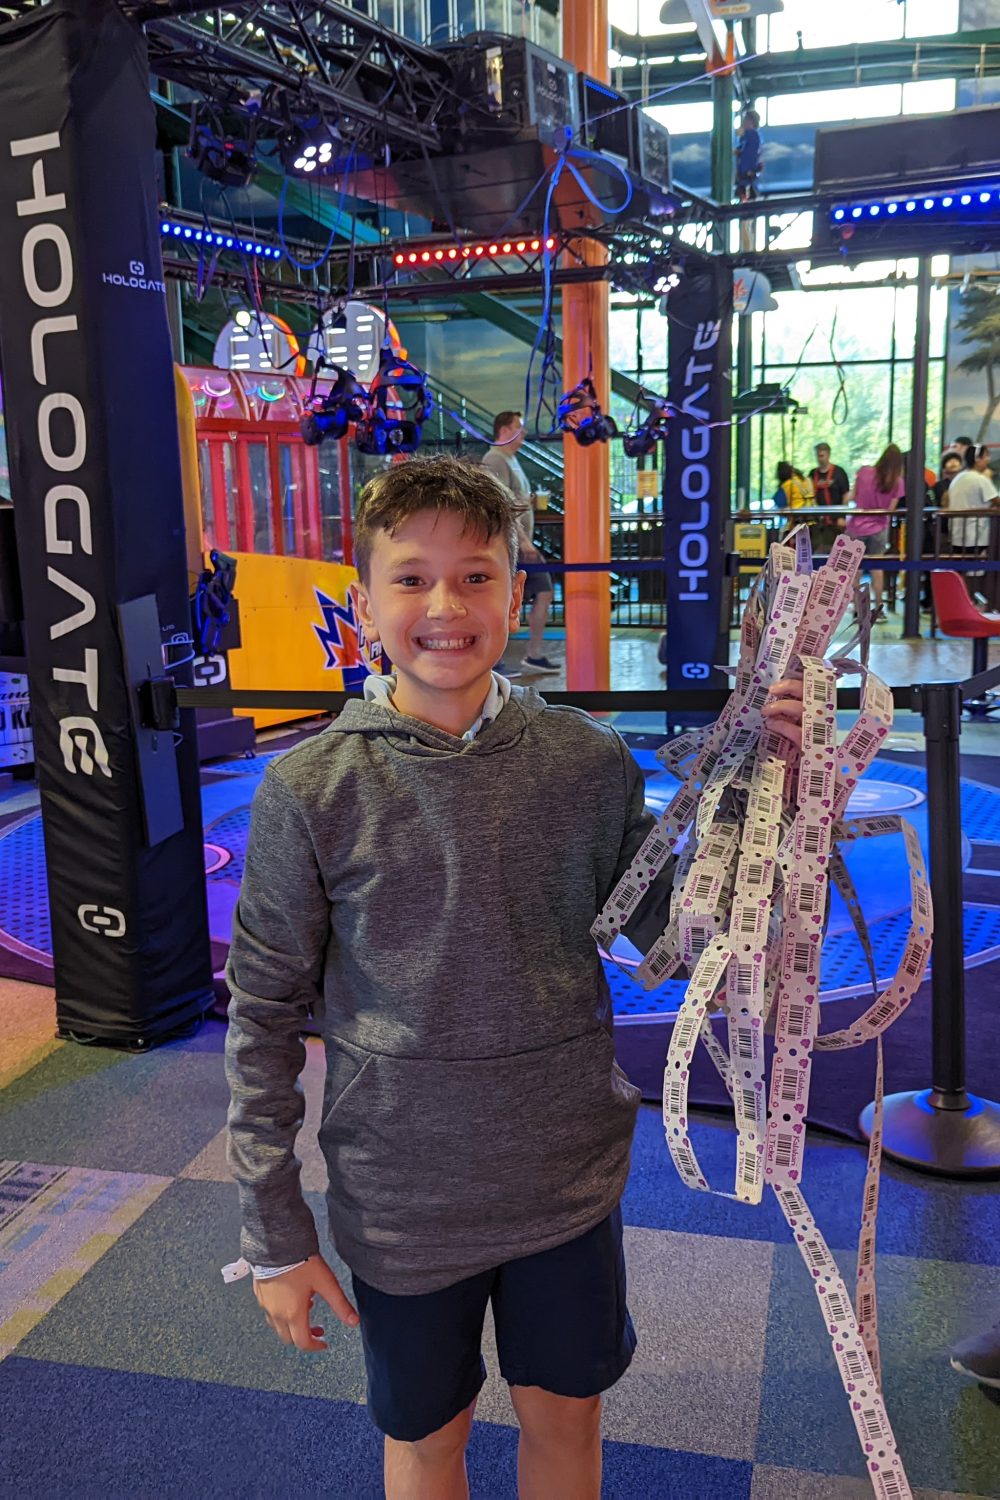 Our son winning lots of tickes in the Arcade at Tome Foolerys